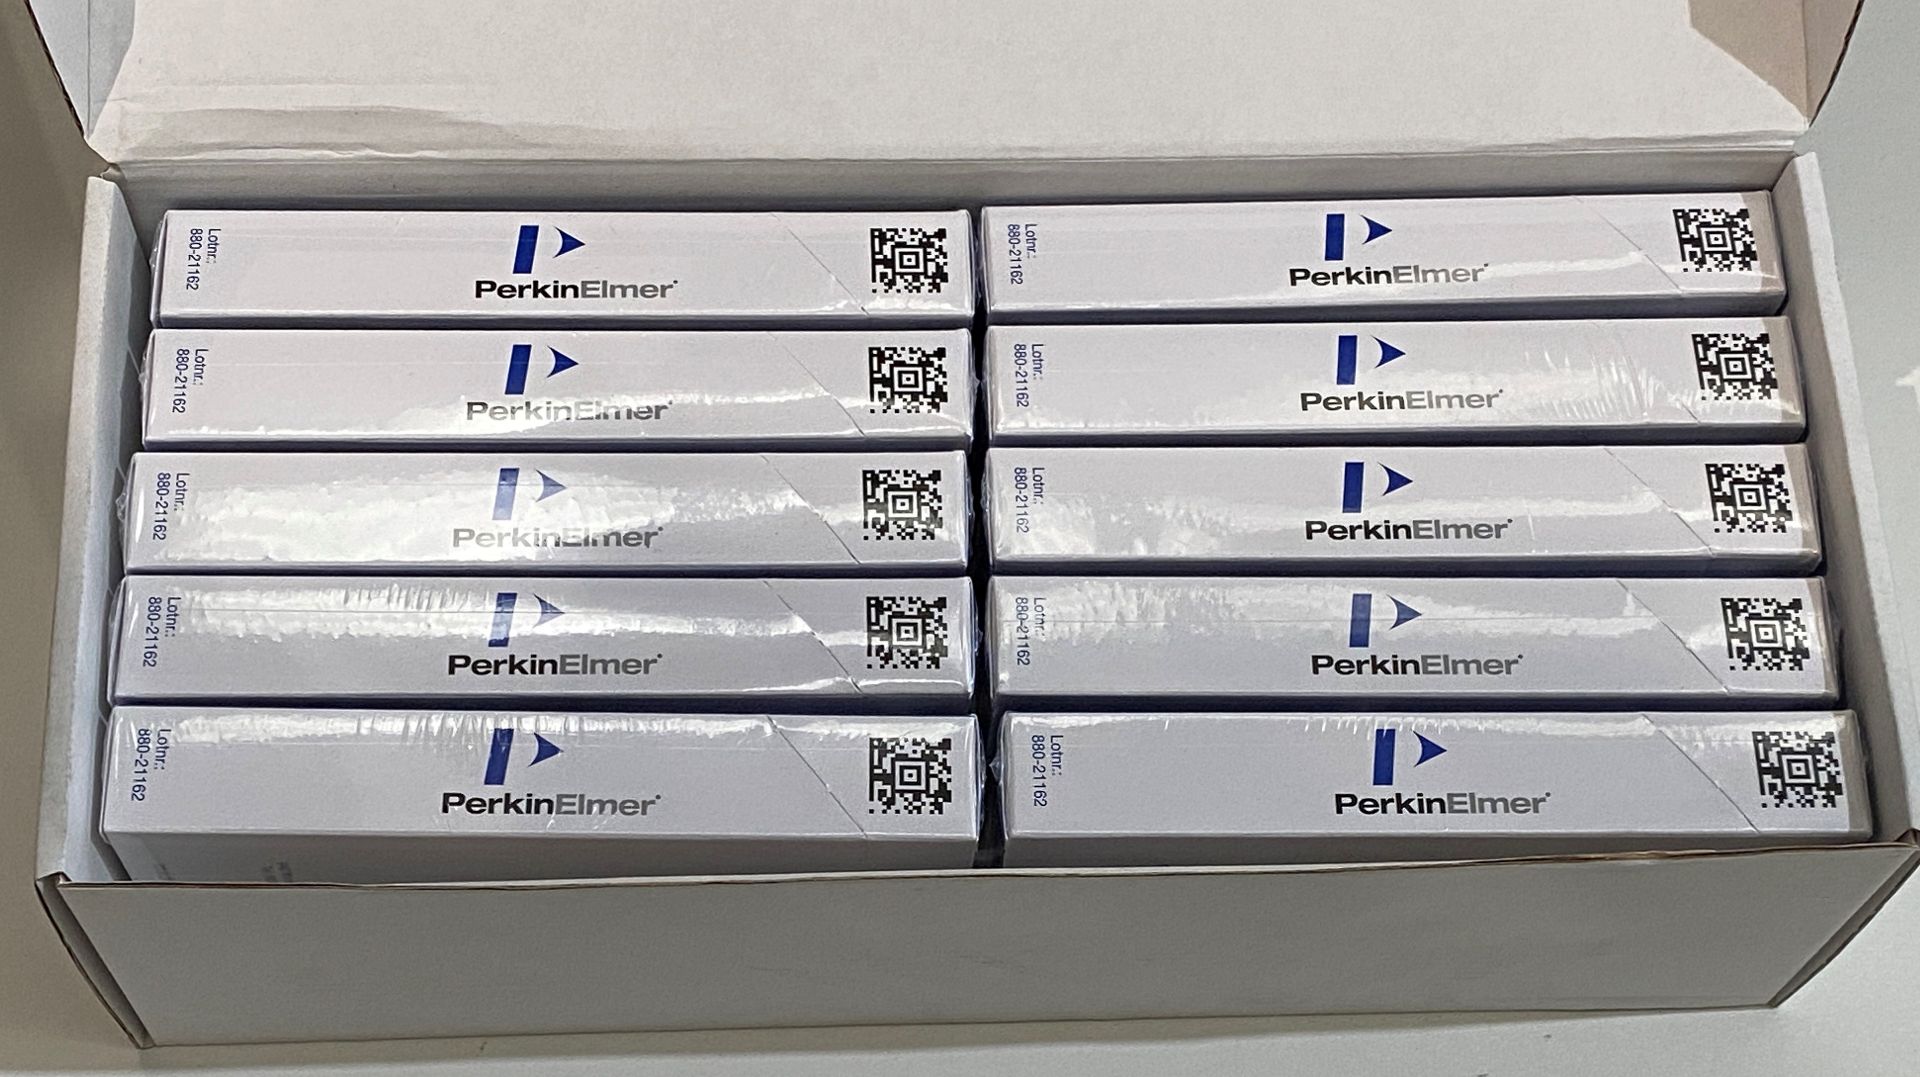 100 x Packs of PerkinElmer Top Seal - A Plus 6050185 clear adhesive microplate seals - 100 units - Image 2 of 5